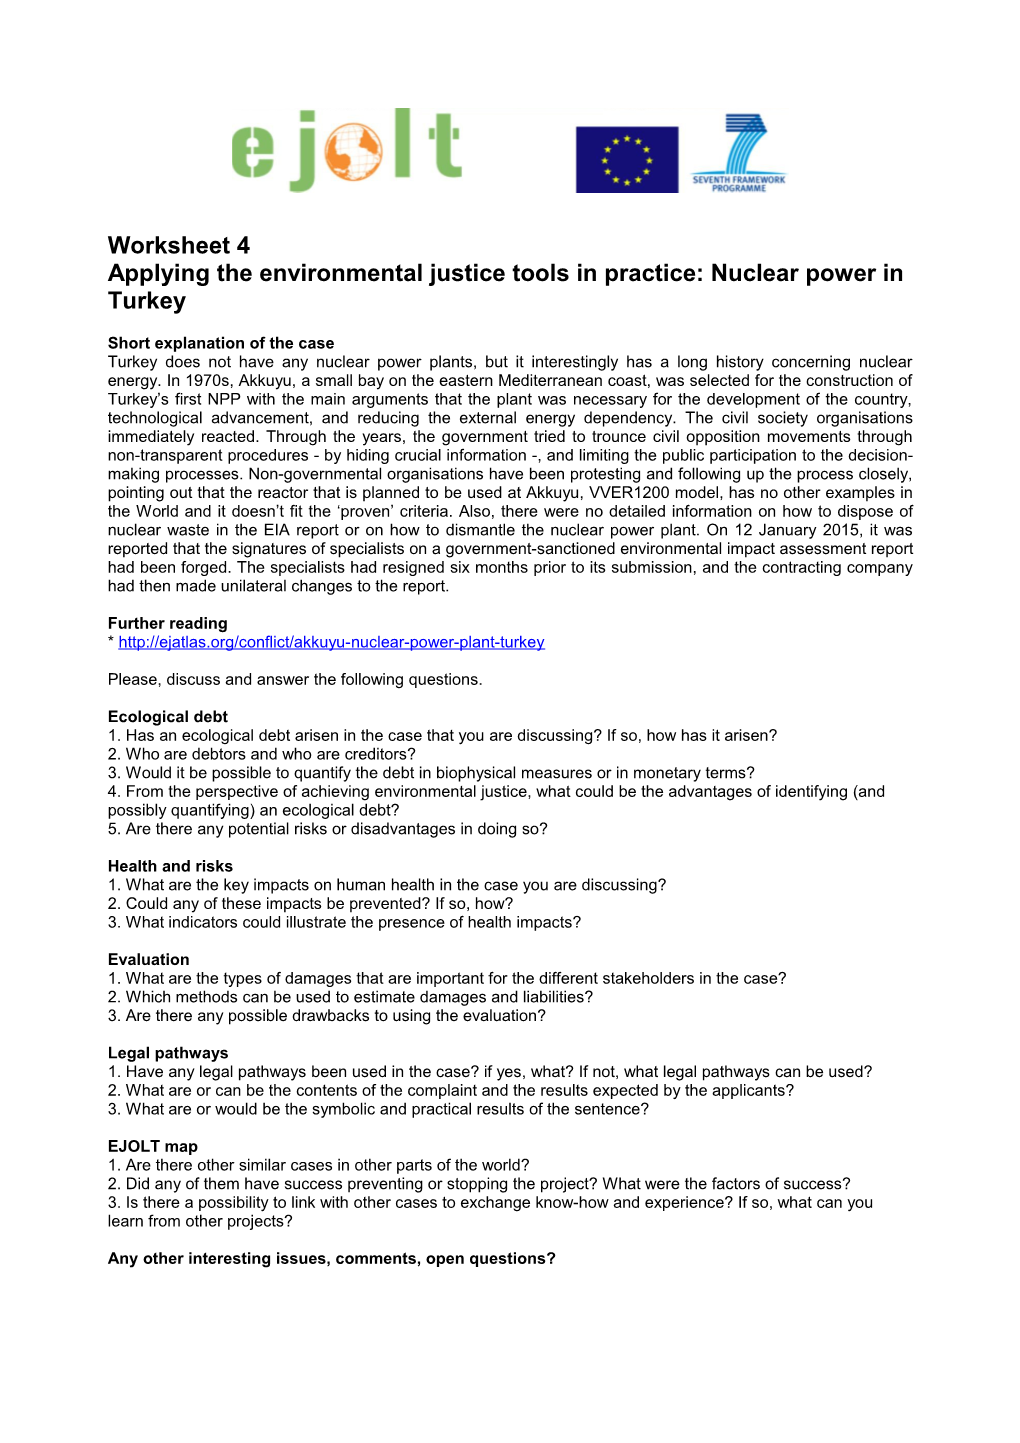 Applying the Environmental Justice Tools in Practice: Nuclear Power in Turkey